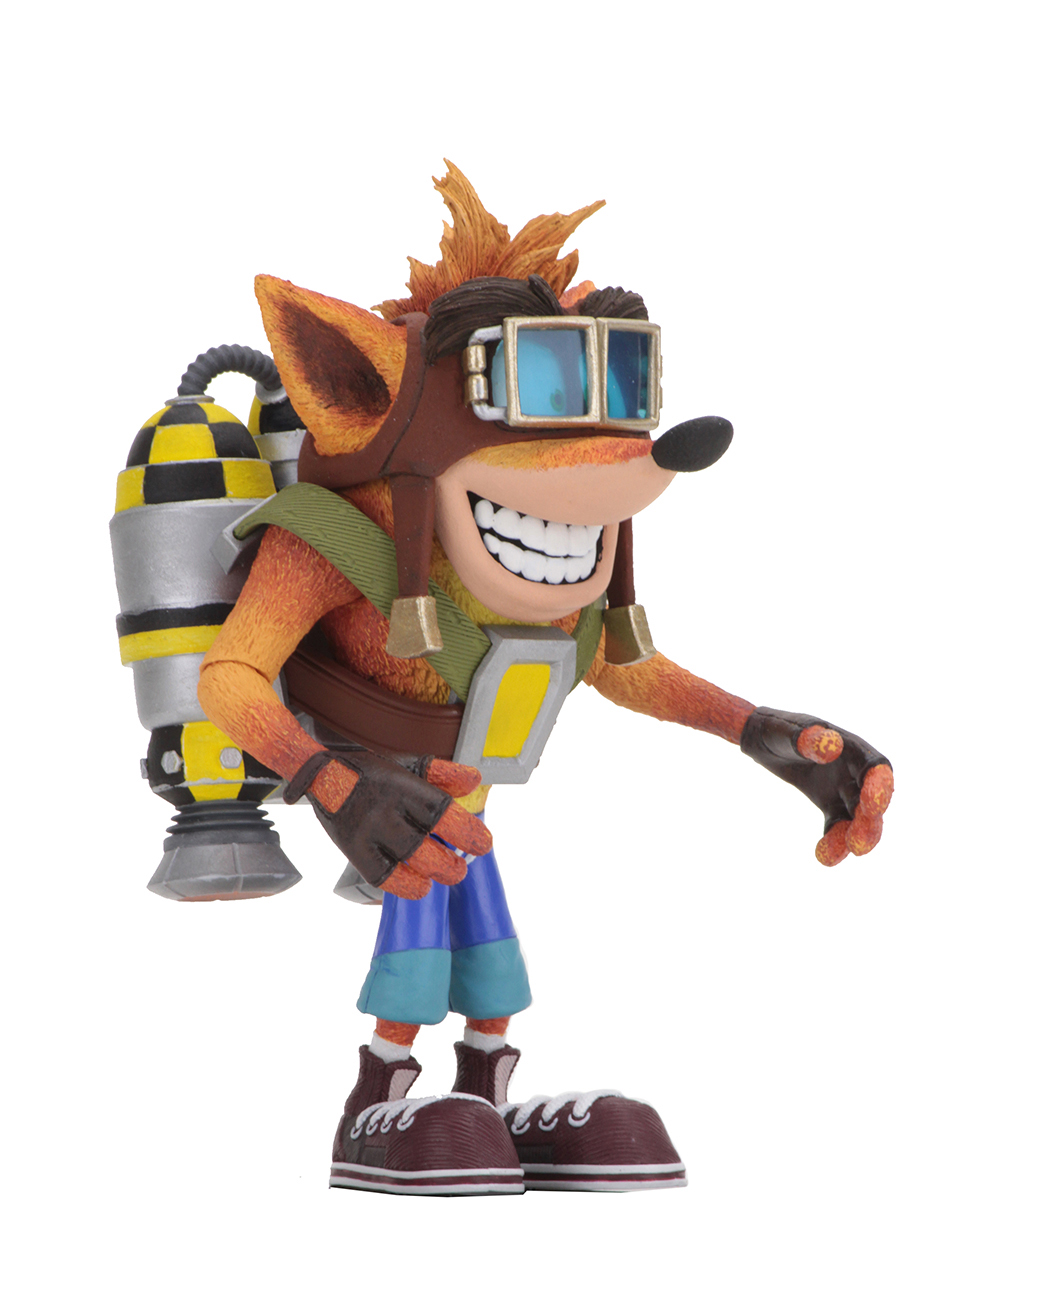 Crash Bandicoot Poseable Figure with Jet Pack from Crash Bandicoot